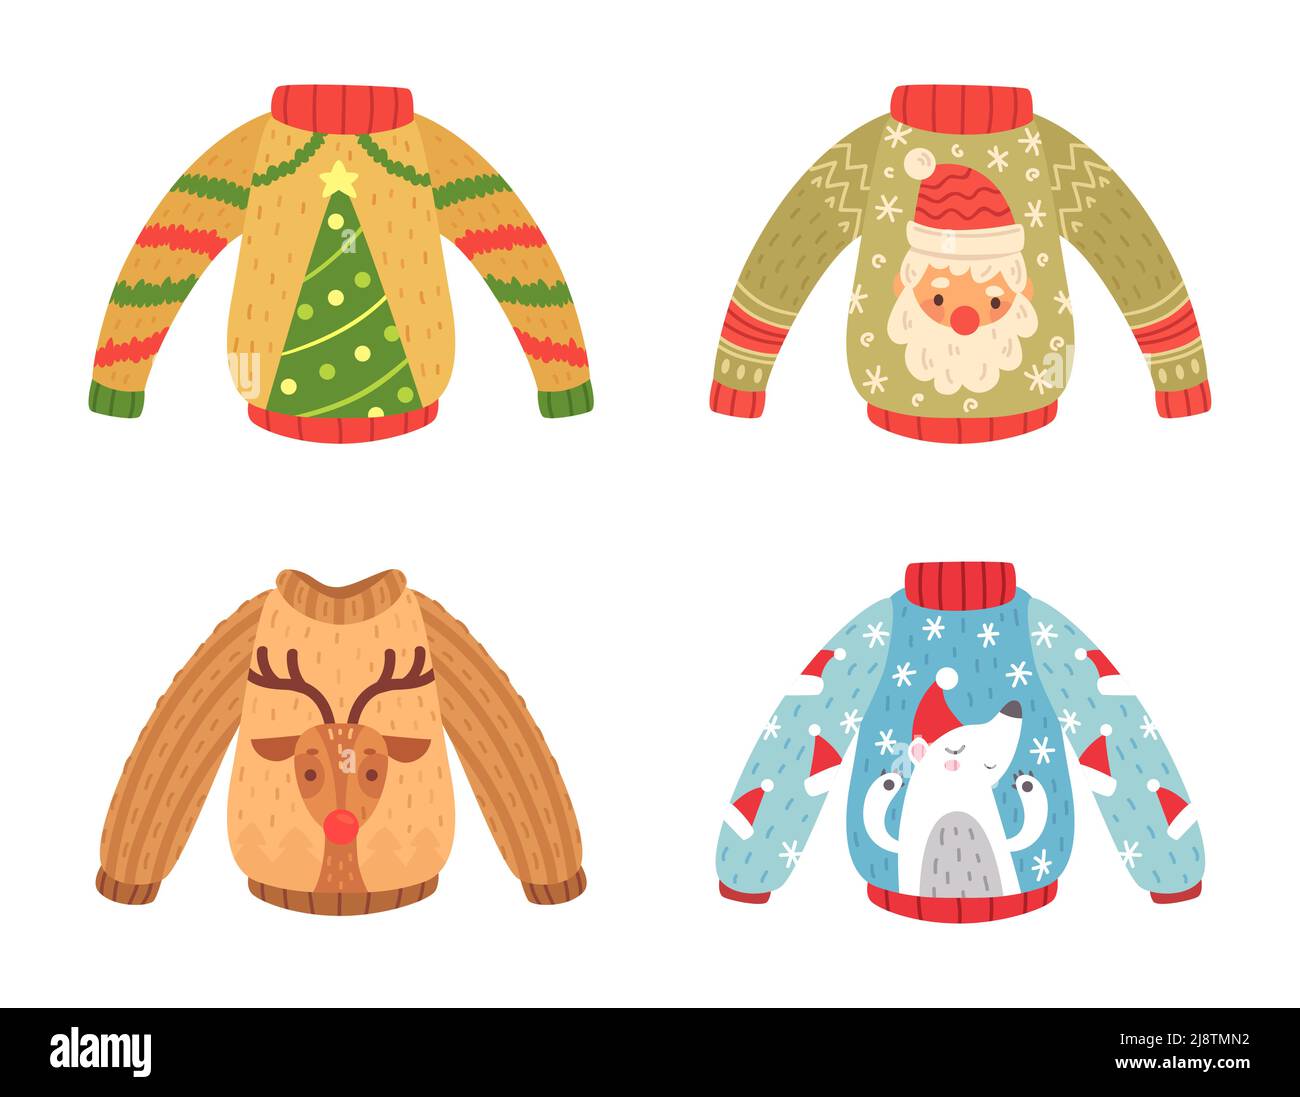 Cartoon christmas party jumpers decorated fir tree, Santa Claus, reindeer and bear design. Cute warm sweaters for winter holiday Stock Vector